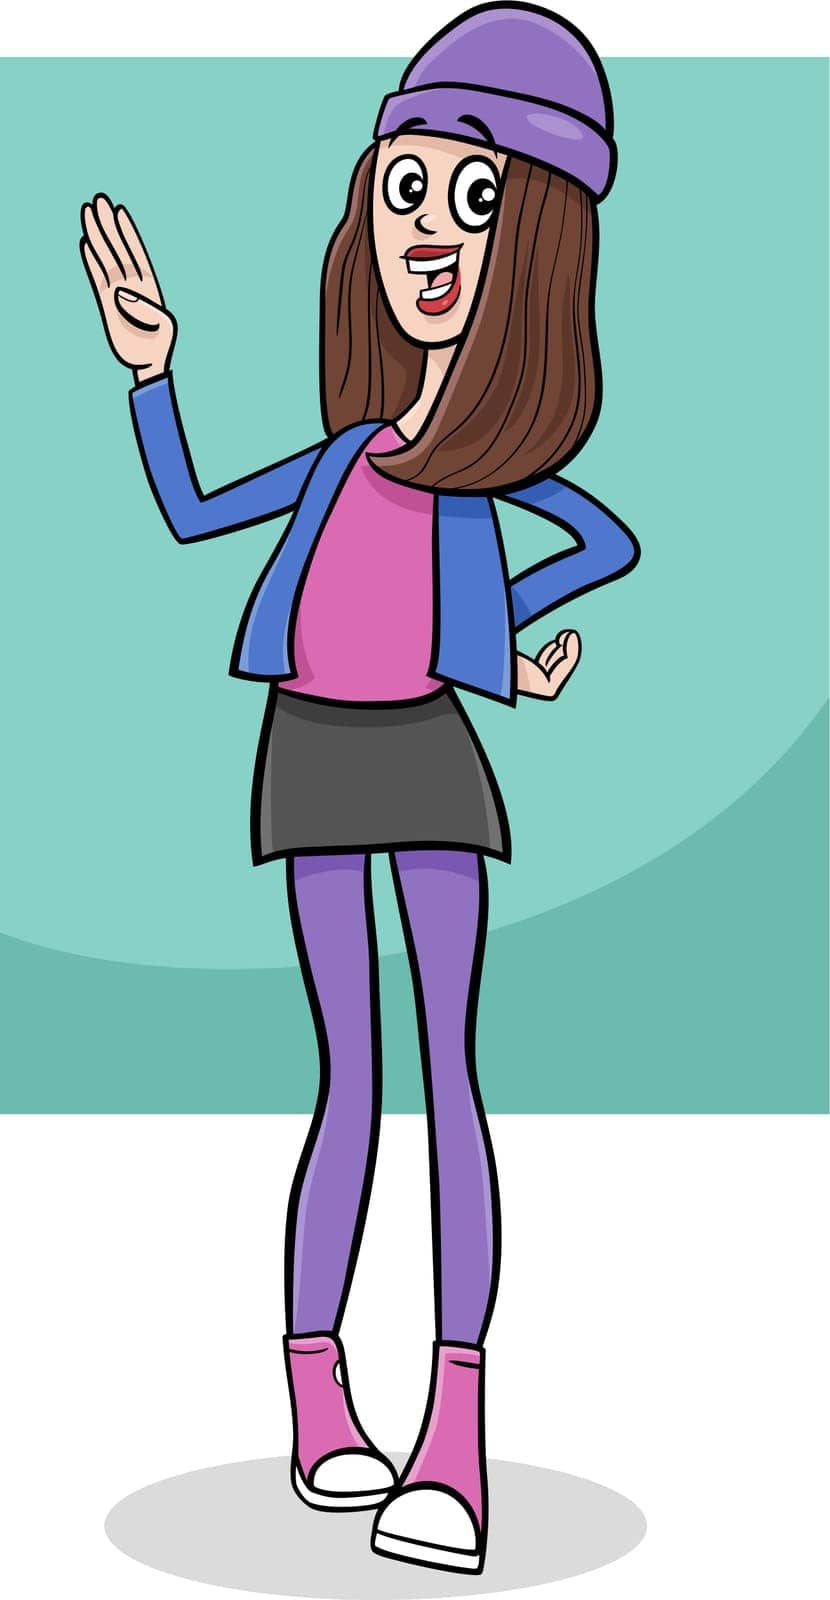 Cartoon illustration of funny girl or young woman comic character